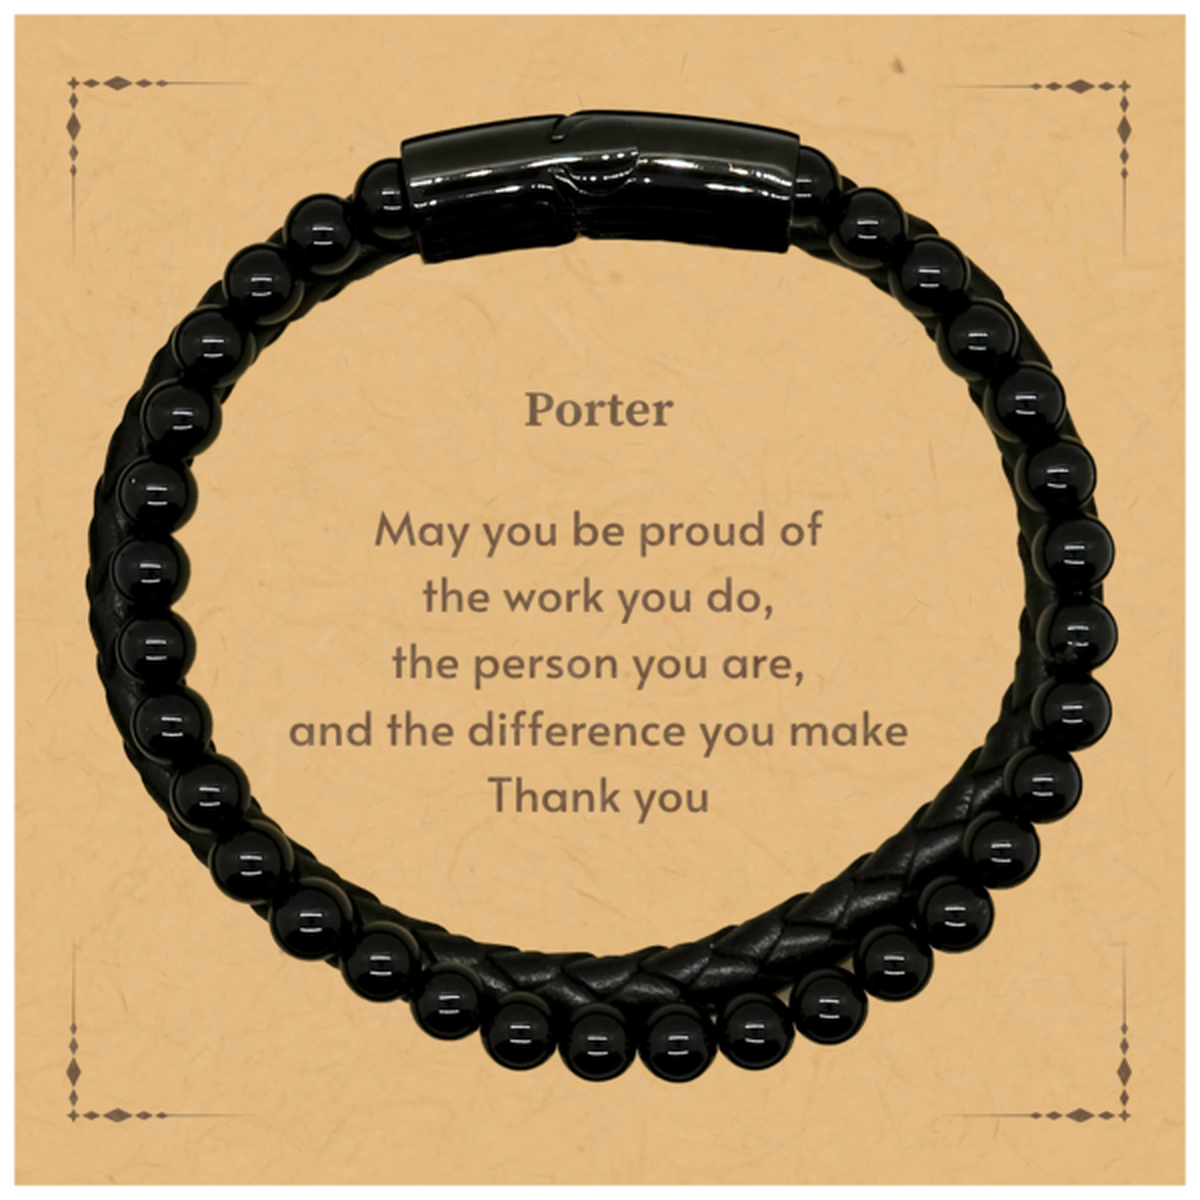 Heartwarming Stone Leather Bracelets Retirement Coworkers Gifts for Porter, Porter May You be proud of the work you do, the person you are Gifts for Boss Men Women Friends